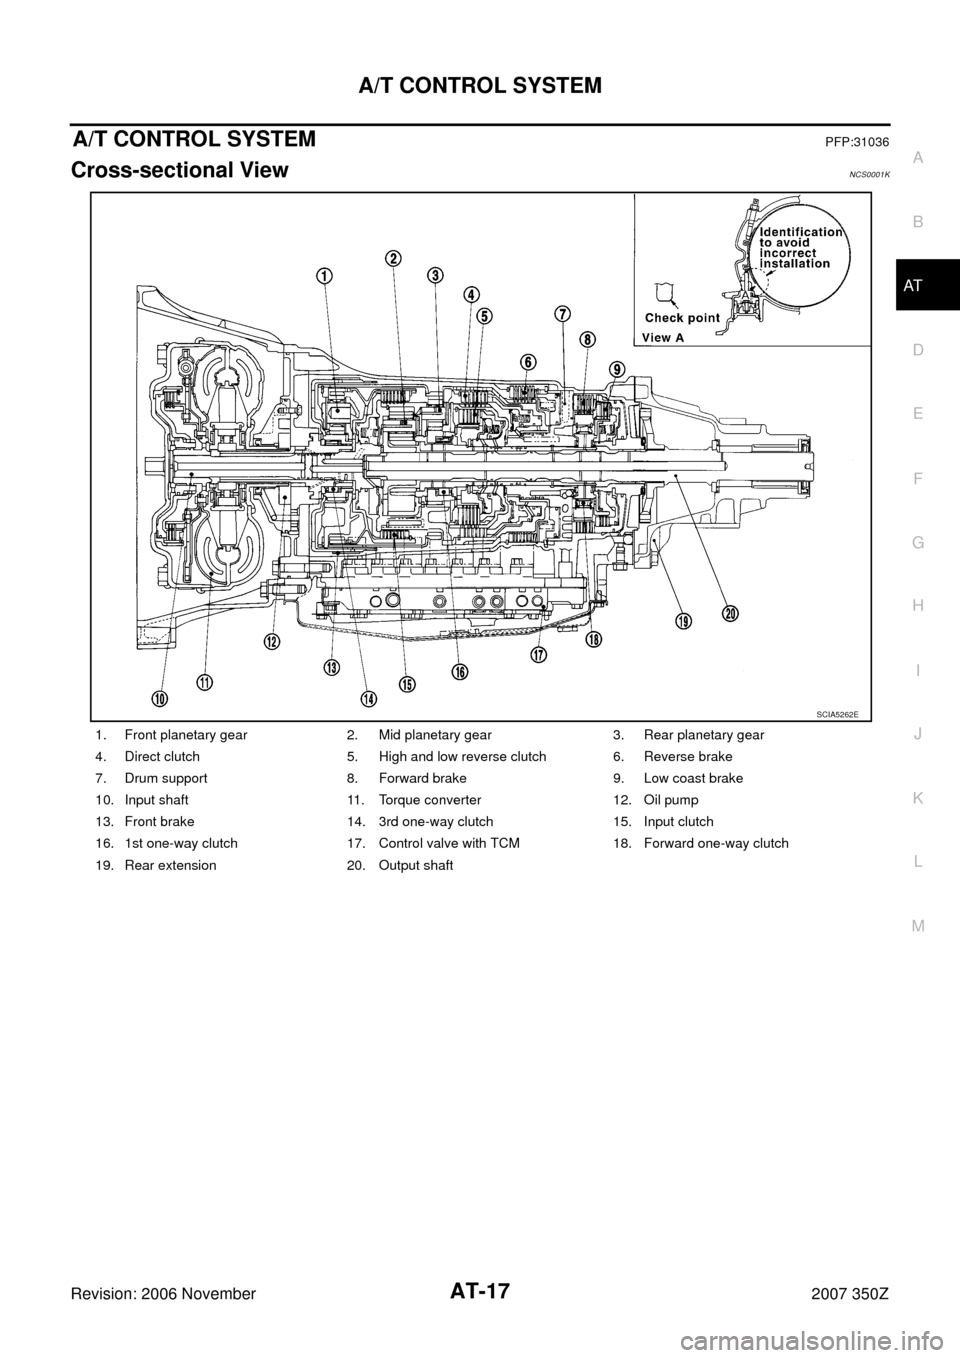 NISSAN 350Z 2007 Z33 Automatic Transmission User Guide A/T CONTROL SYSTEM
AT-17
D
E
F
G
H
I
J
K
L
MA
B
AT
Revision: 2006 November2007 350Z
A/T CONTROL SYSTEMPFP:31036
Cross-sectional ViewNCS0001K
1. Front planetary gear 2. Mid planetary gear 3. Rear plane